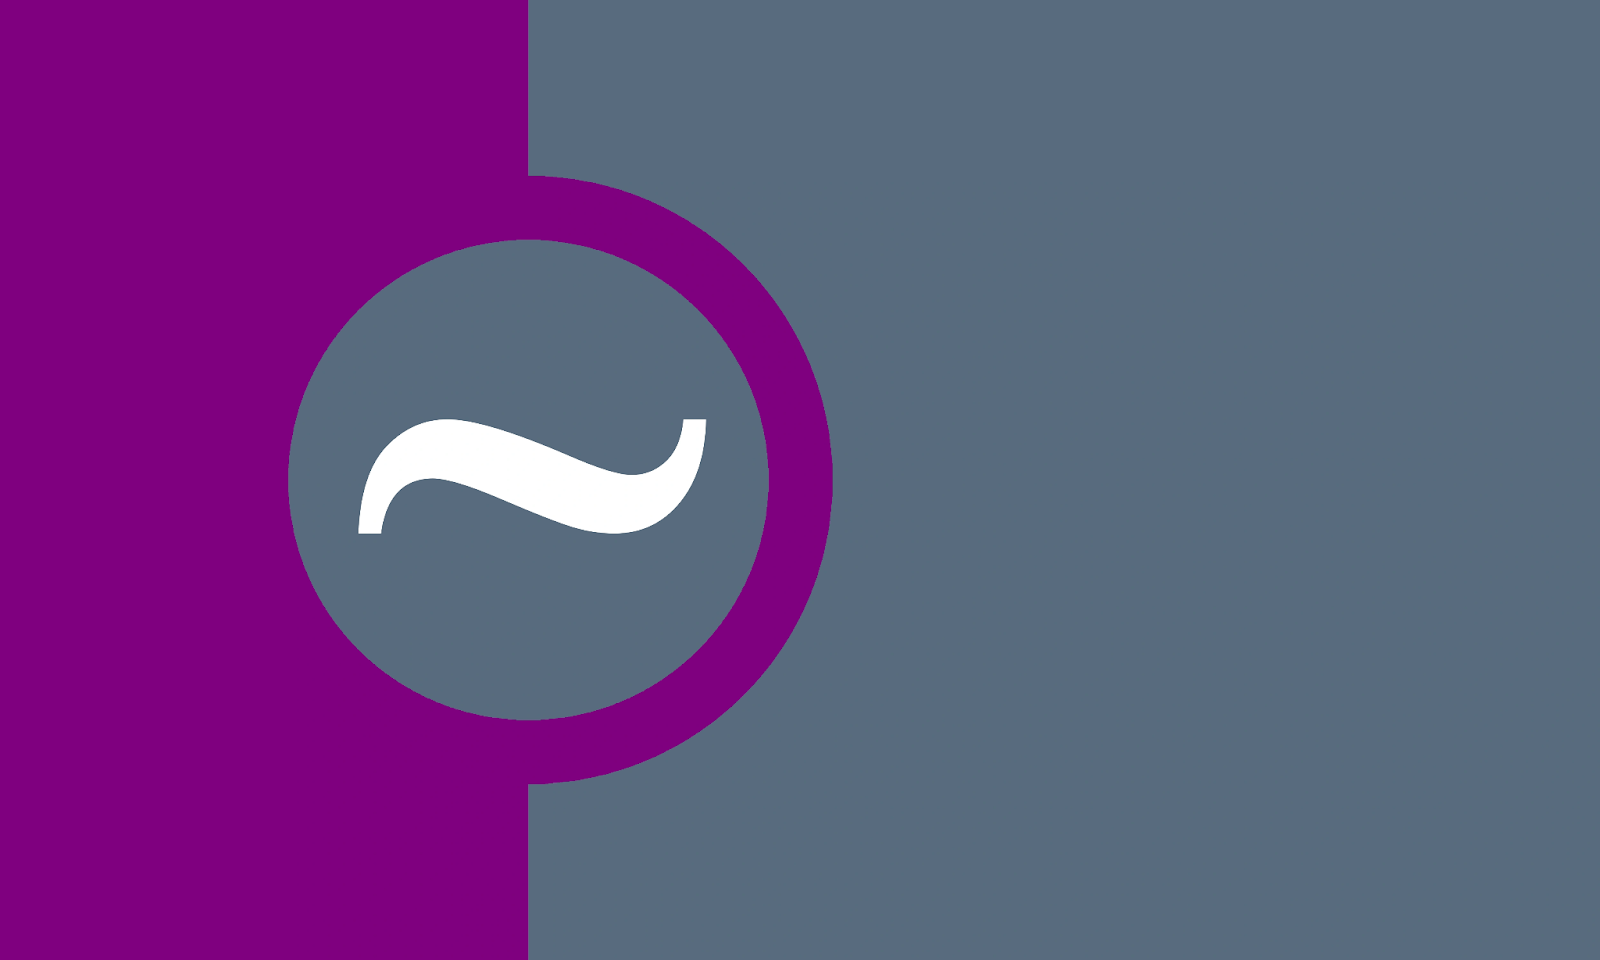 The sex-averse flag; purple on the left, grey-blue on the right, with a grey-blue circle in the purple and a white tilde in the circle